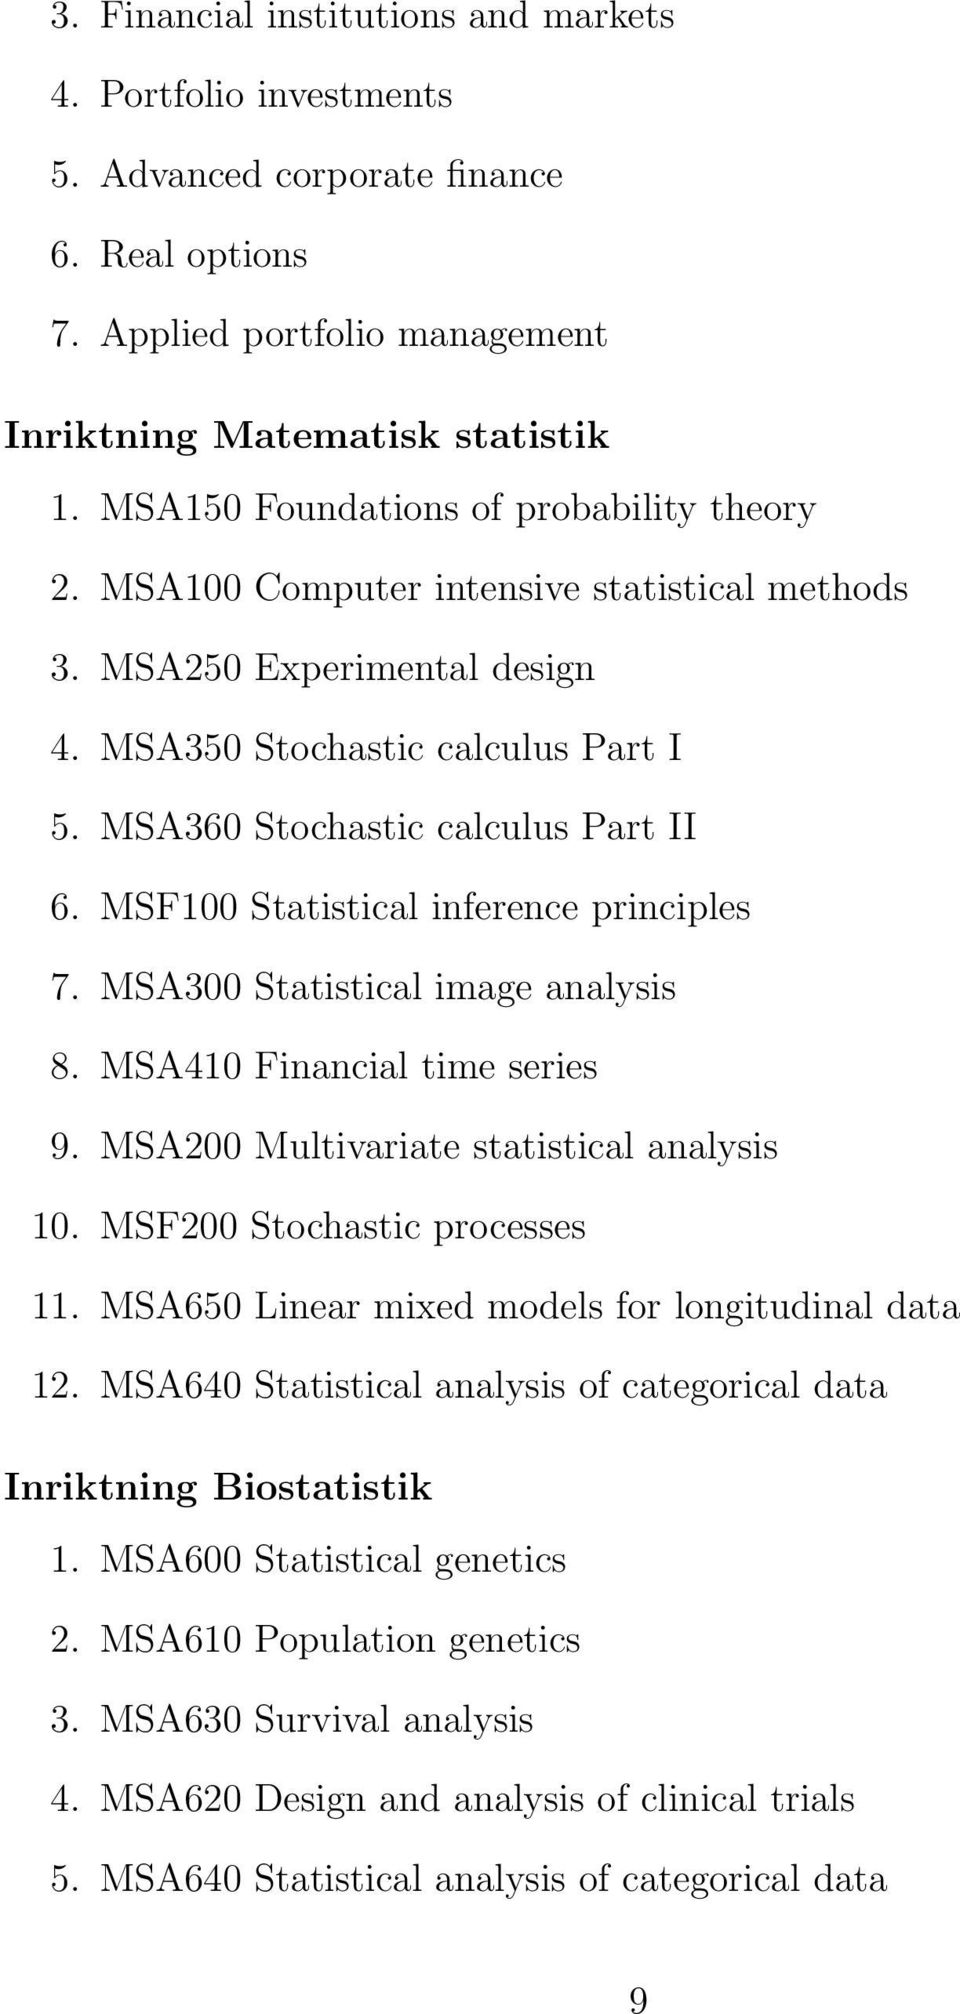 MSF100 Statistical inference principles 7. MSA300 Statistical image analysis 8. MSA410 Financial time series 9. MSA200 Multivariate statistical analysis 10. MSF200 Stochastic processes 11.